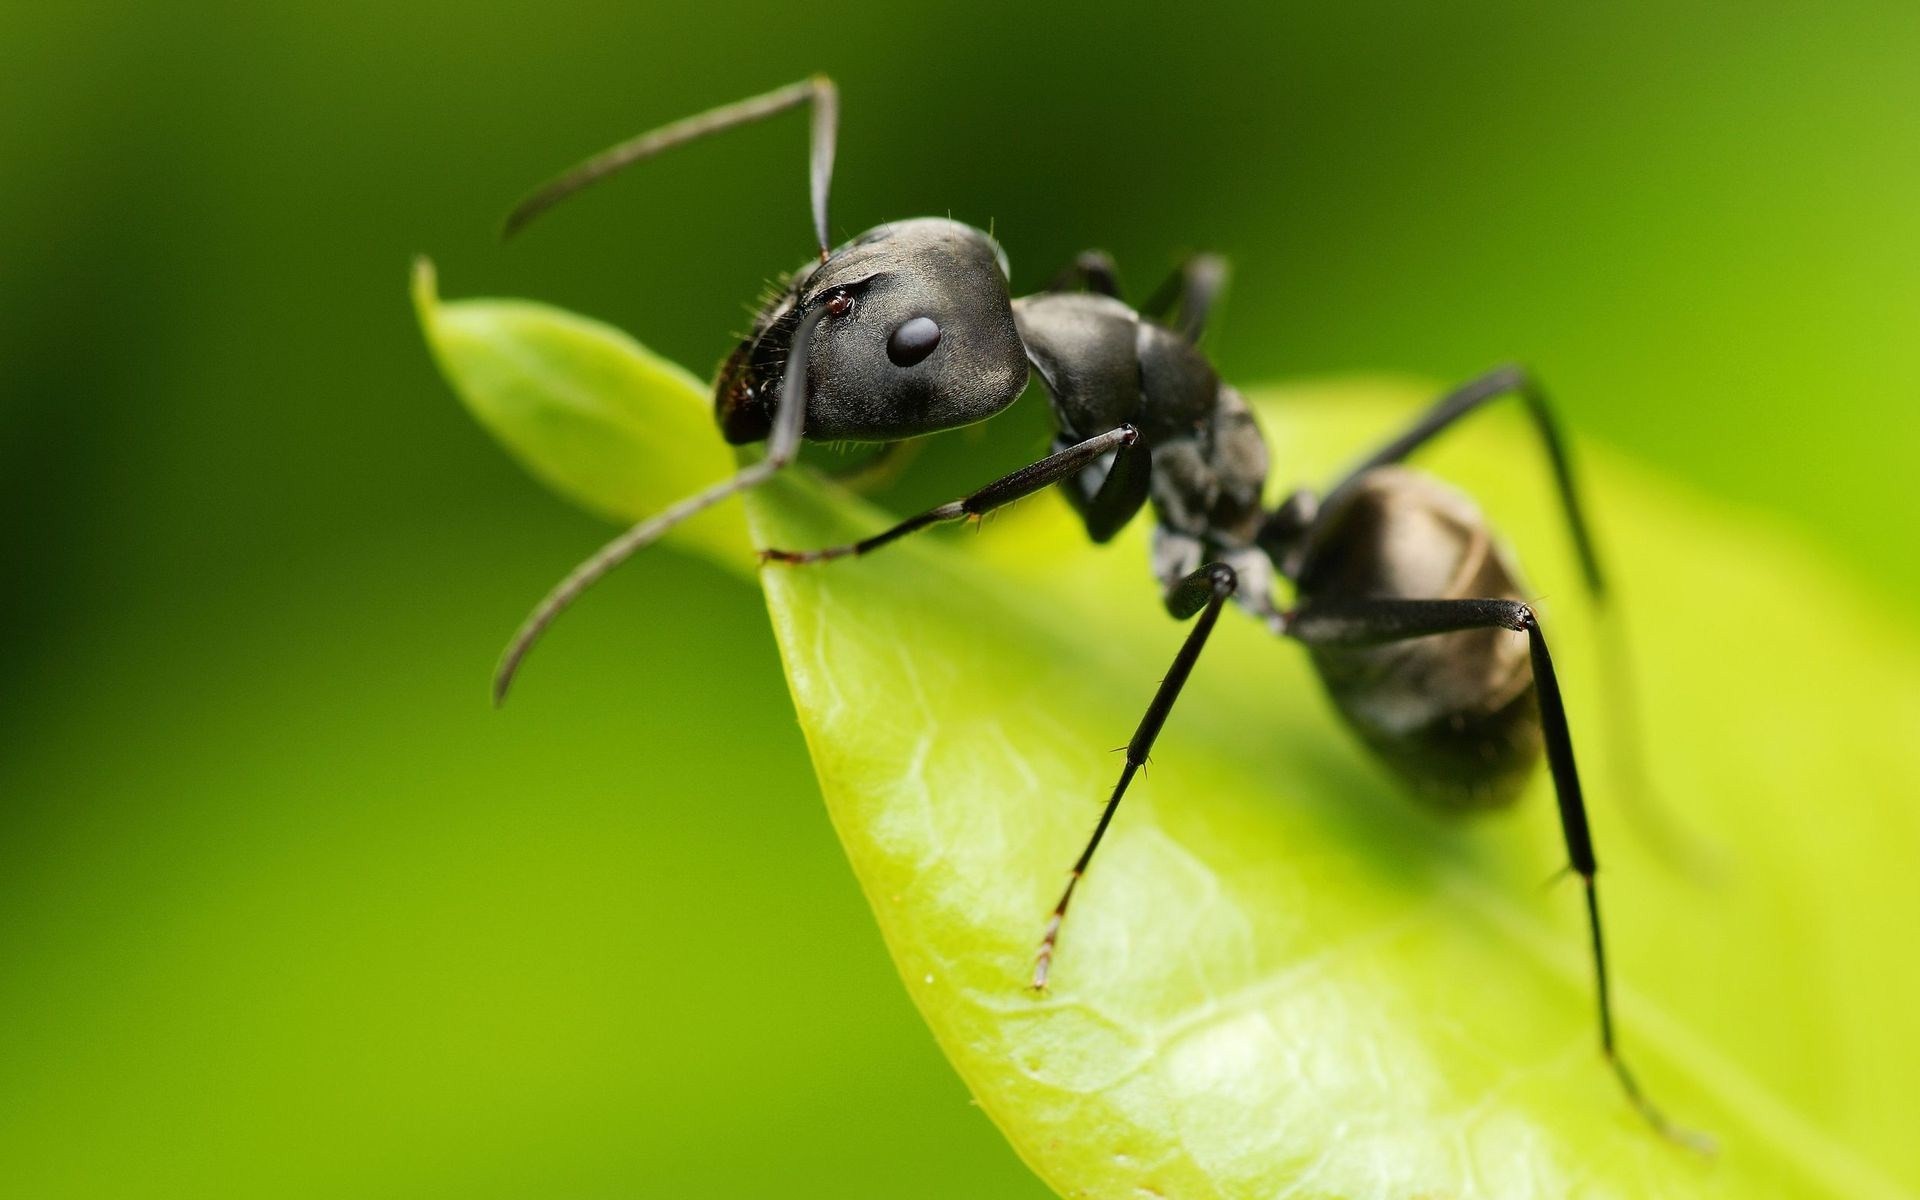 General 1920x1200 animals ants insect hymenoptera macro green background simple background